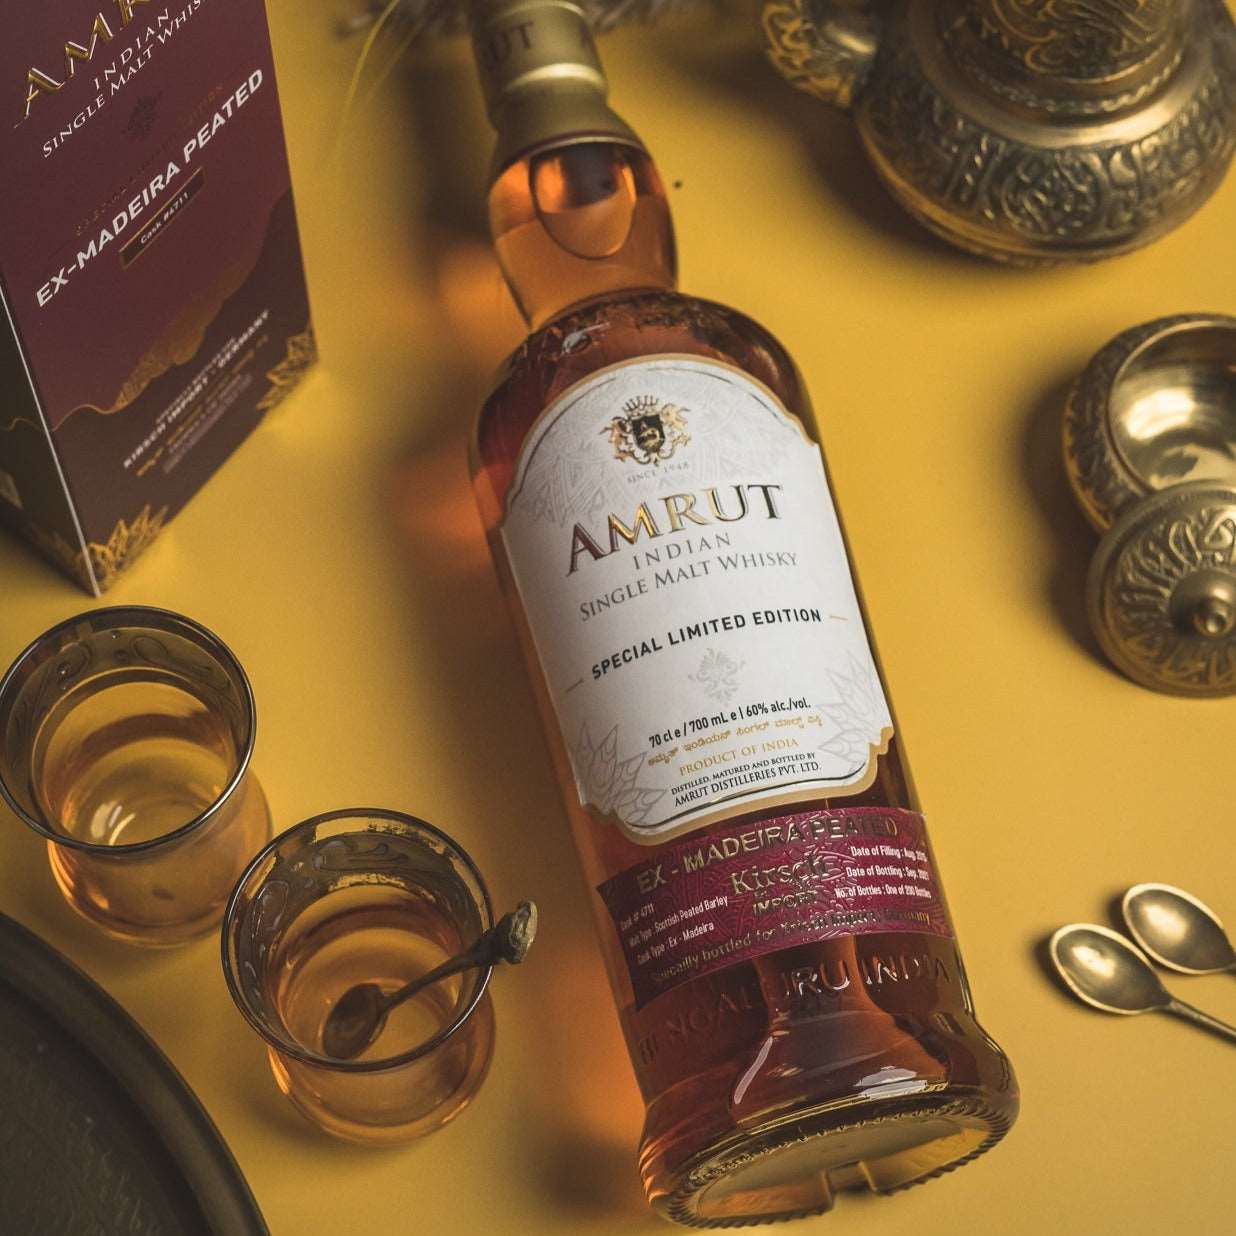 Amrut | 6 Jahre | 2015/2021 | Ex-Madeira Peated Cask #4711 | Indian Whisky | 0,7l | 60%GET A BOTTLE